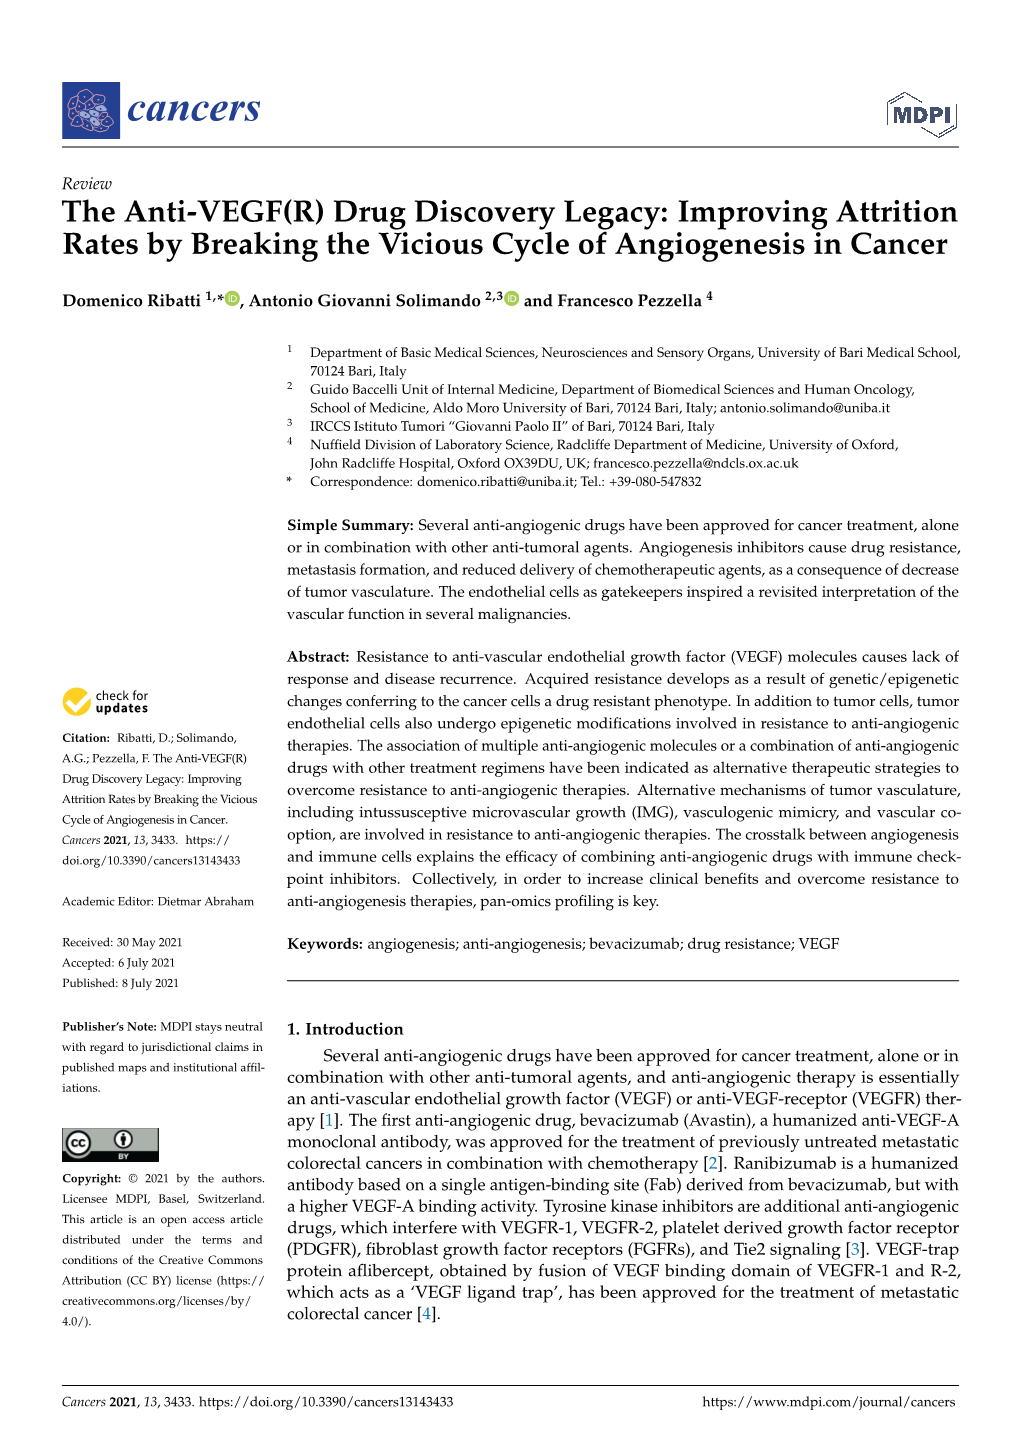 The Anti-VEGF(R) Drug Discovery Legacy: Improving Attrition Rates by Breaking the Vicious Cycle of Angiogenesis in Cancer